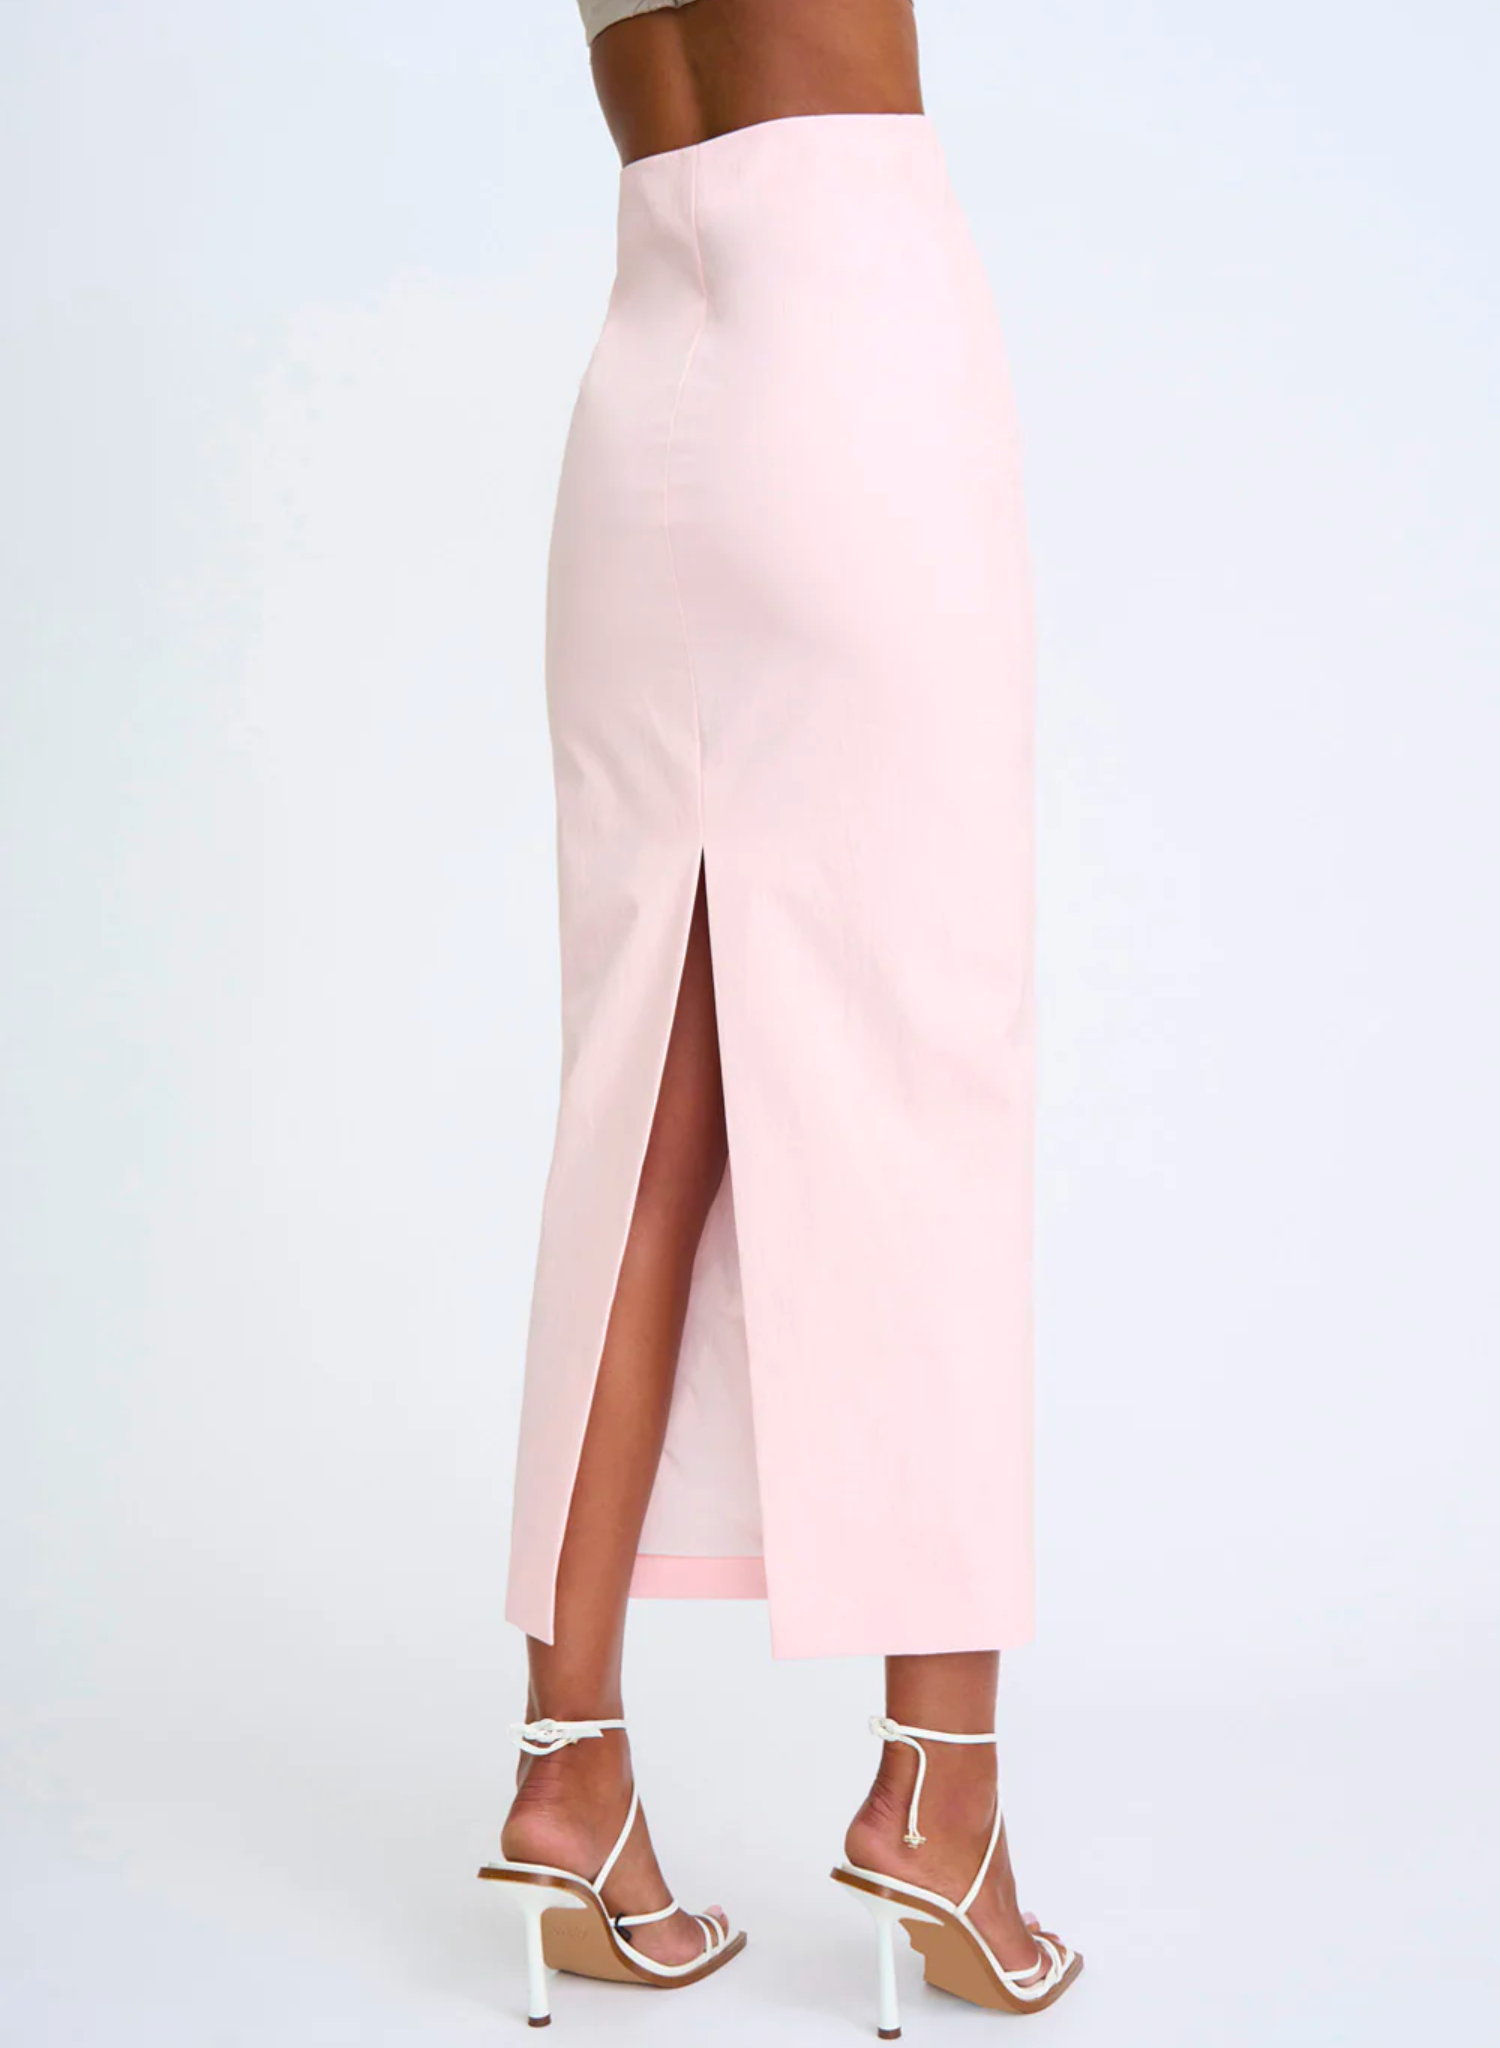 IDA STRUCTURED ANKLE SKIRT - SOFT PINK